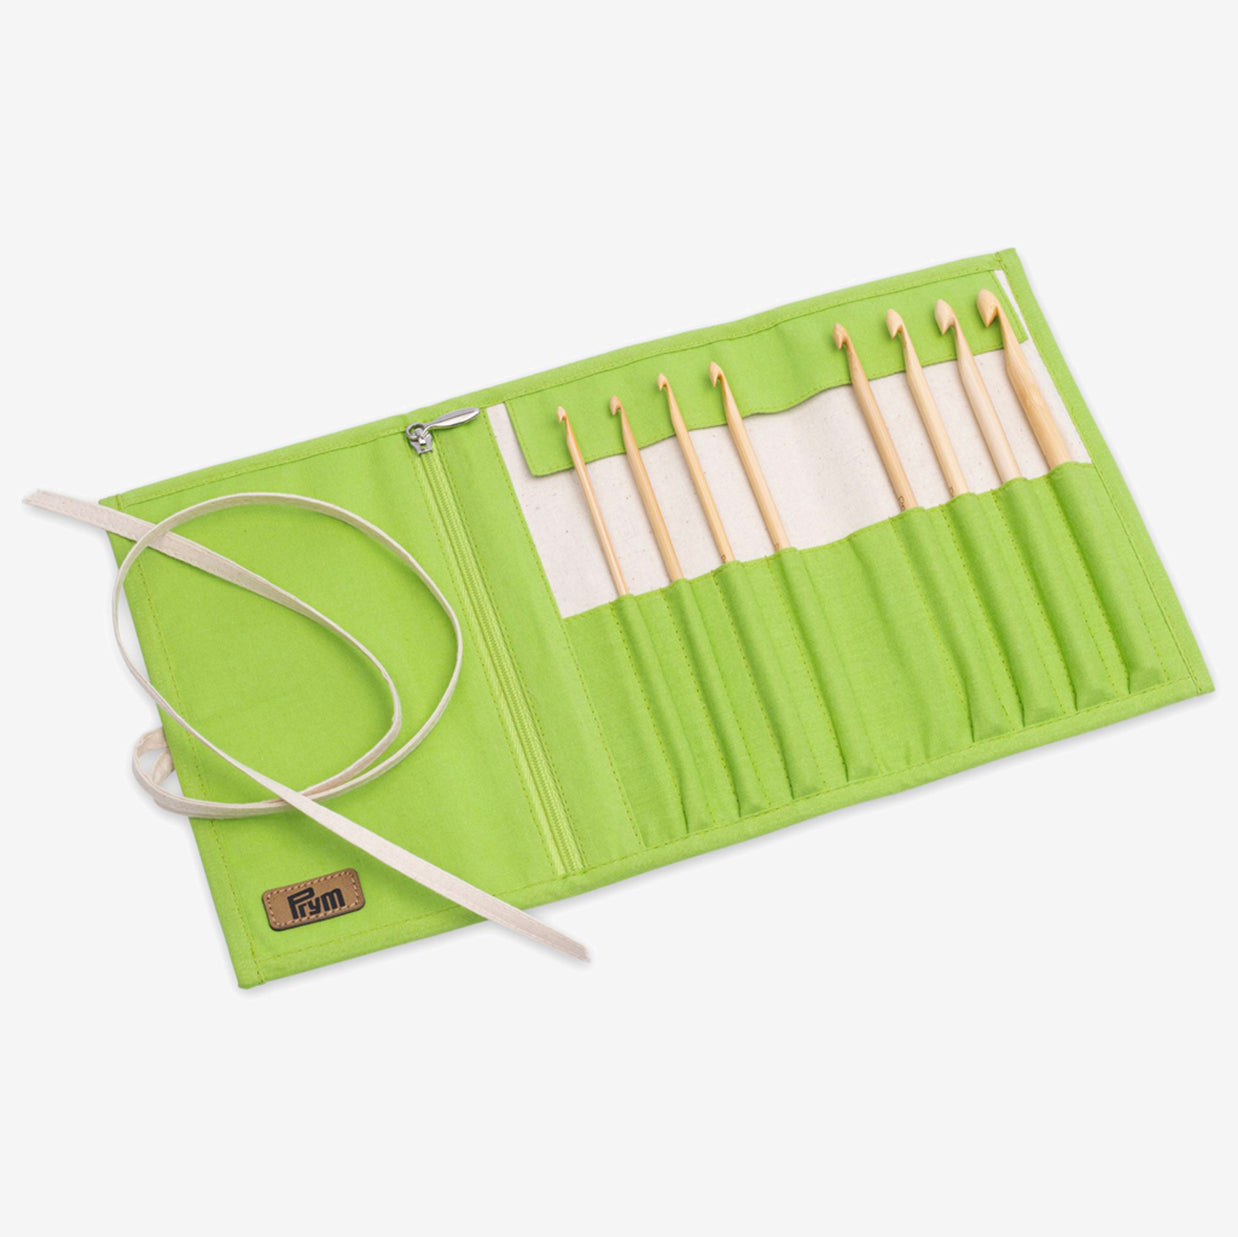 Prym 197610 Bamboo Crochet Hook Set: Softness and Quality for Your Crochet Projects